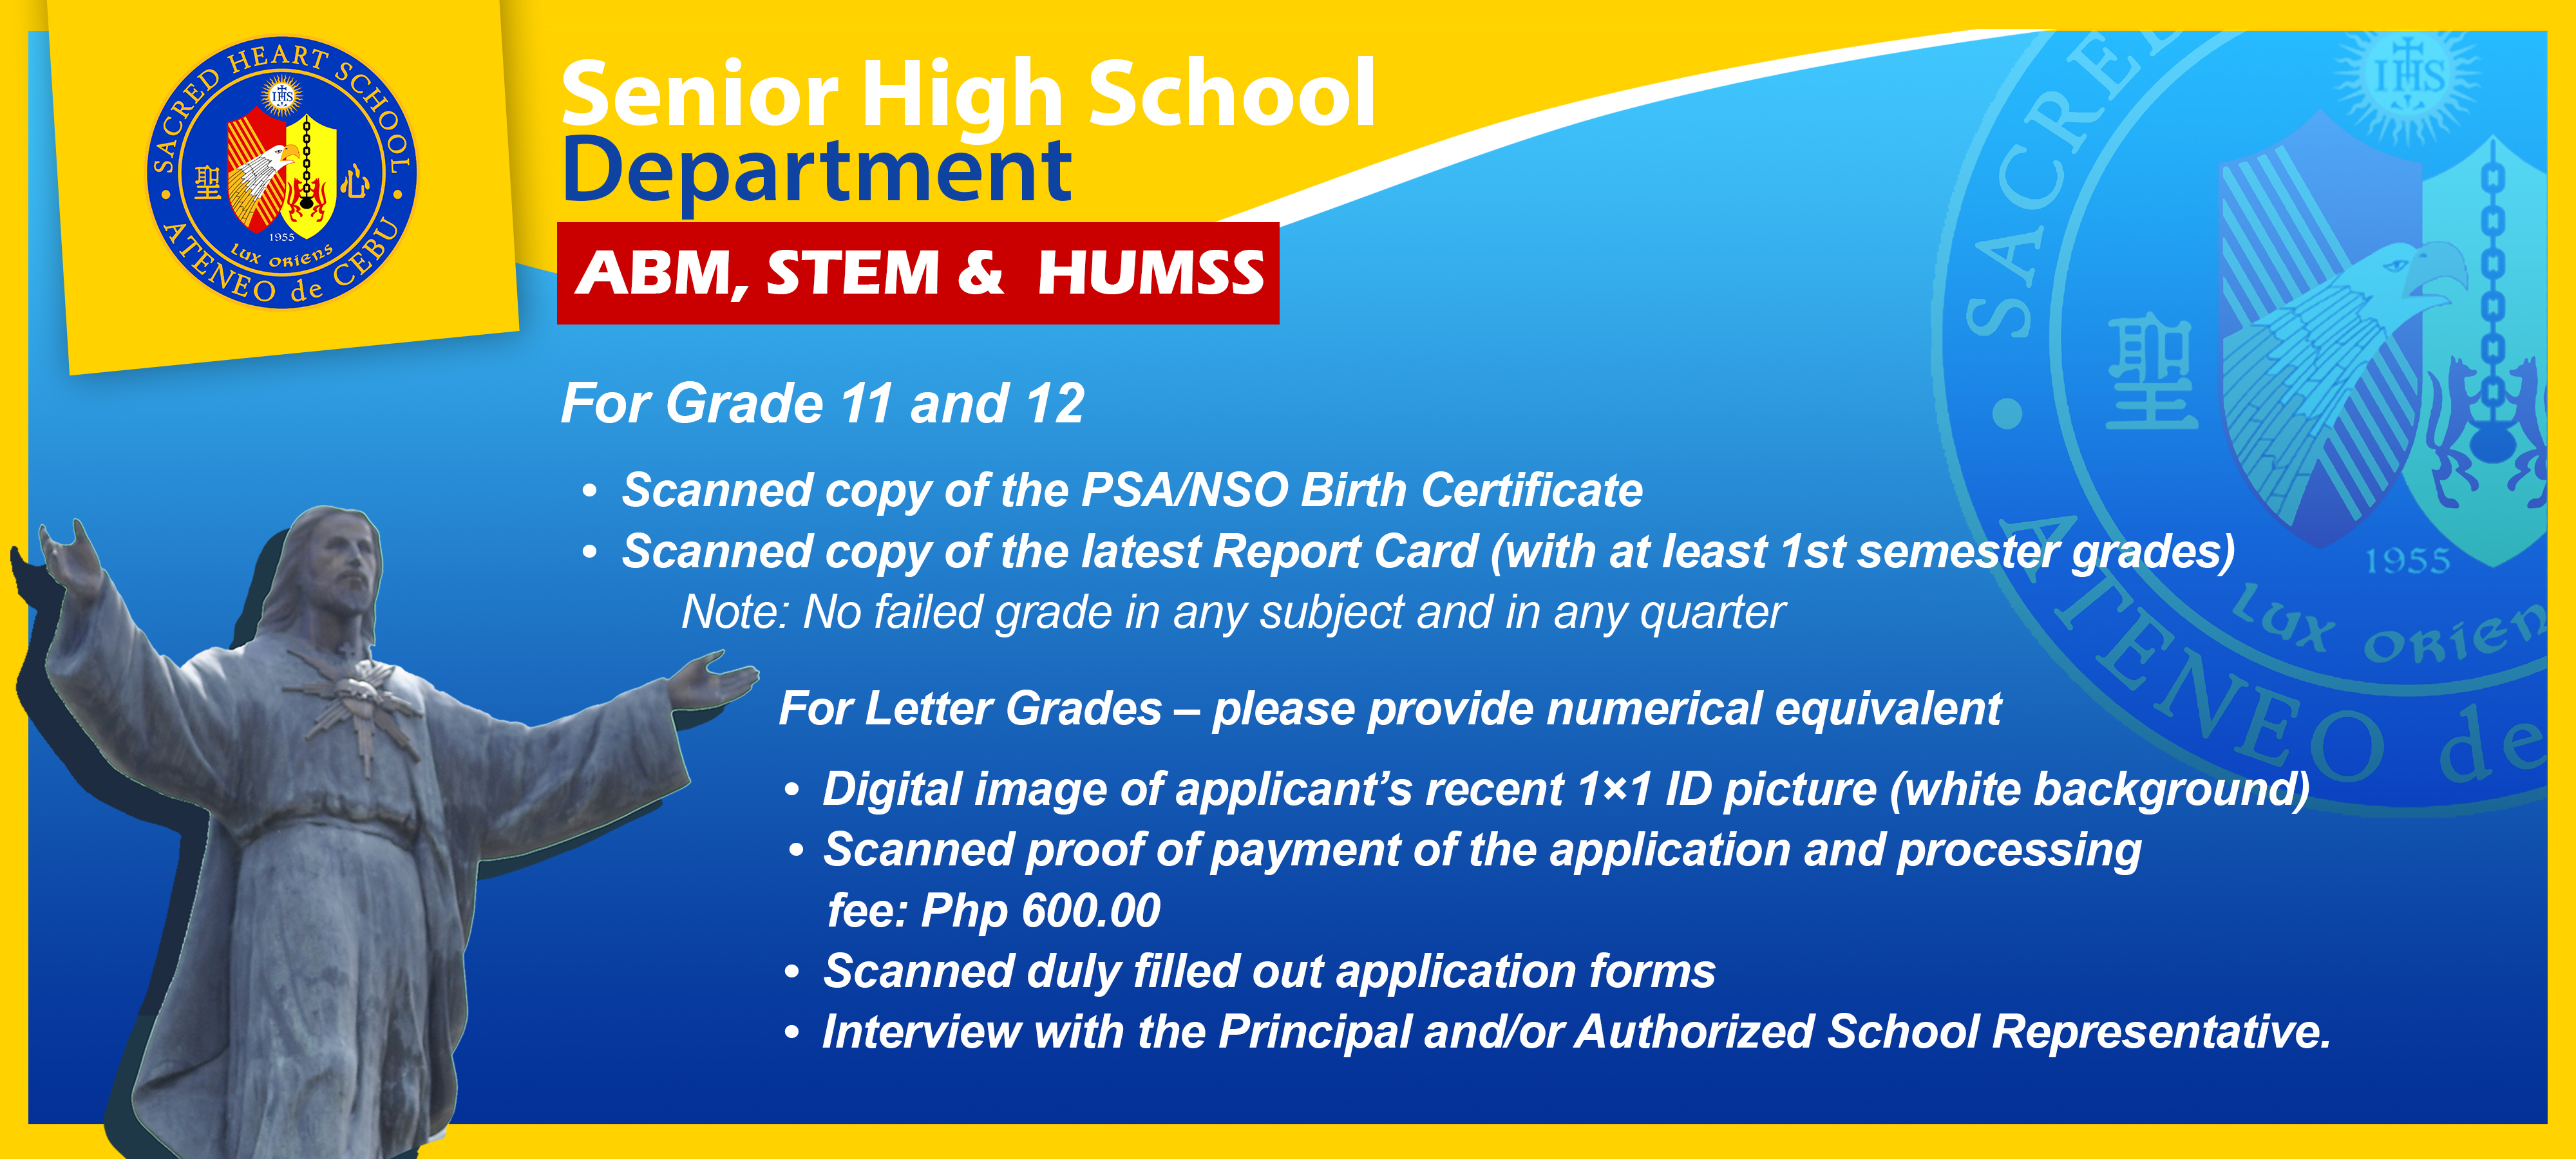 admission requirements SHS sy 21-22